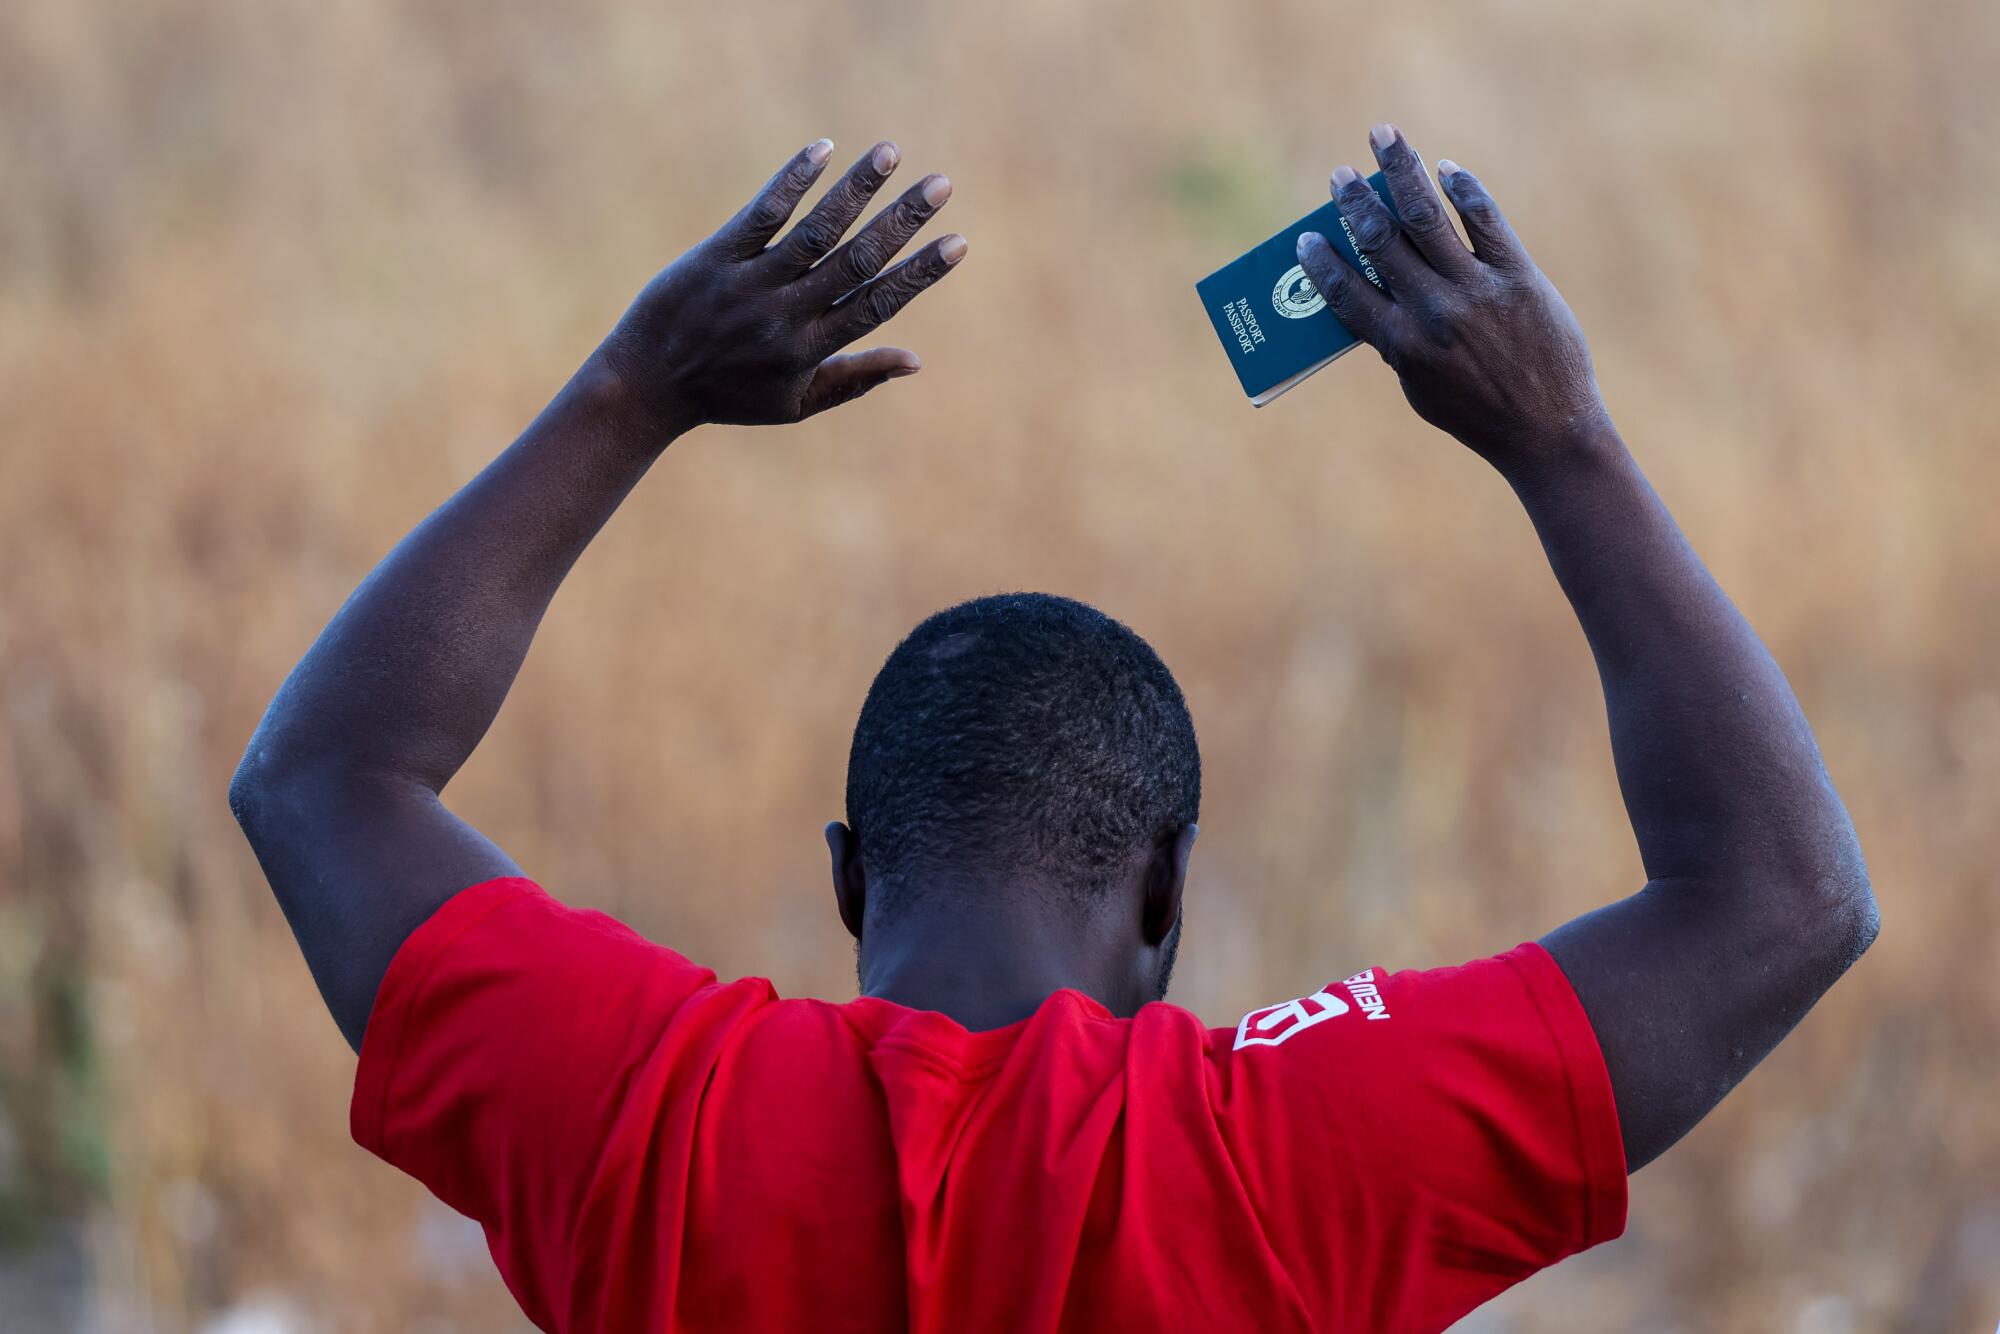 A man standing in a field raises his arms with his passport in his right hand